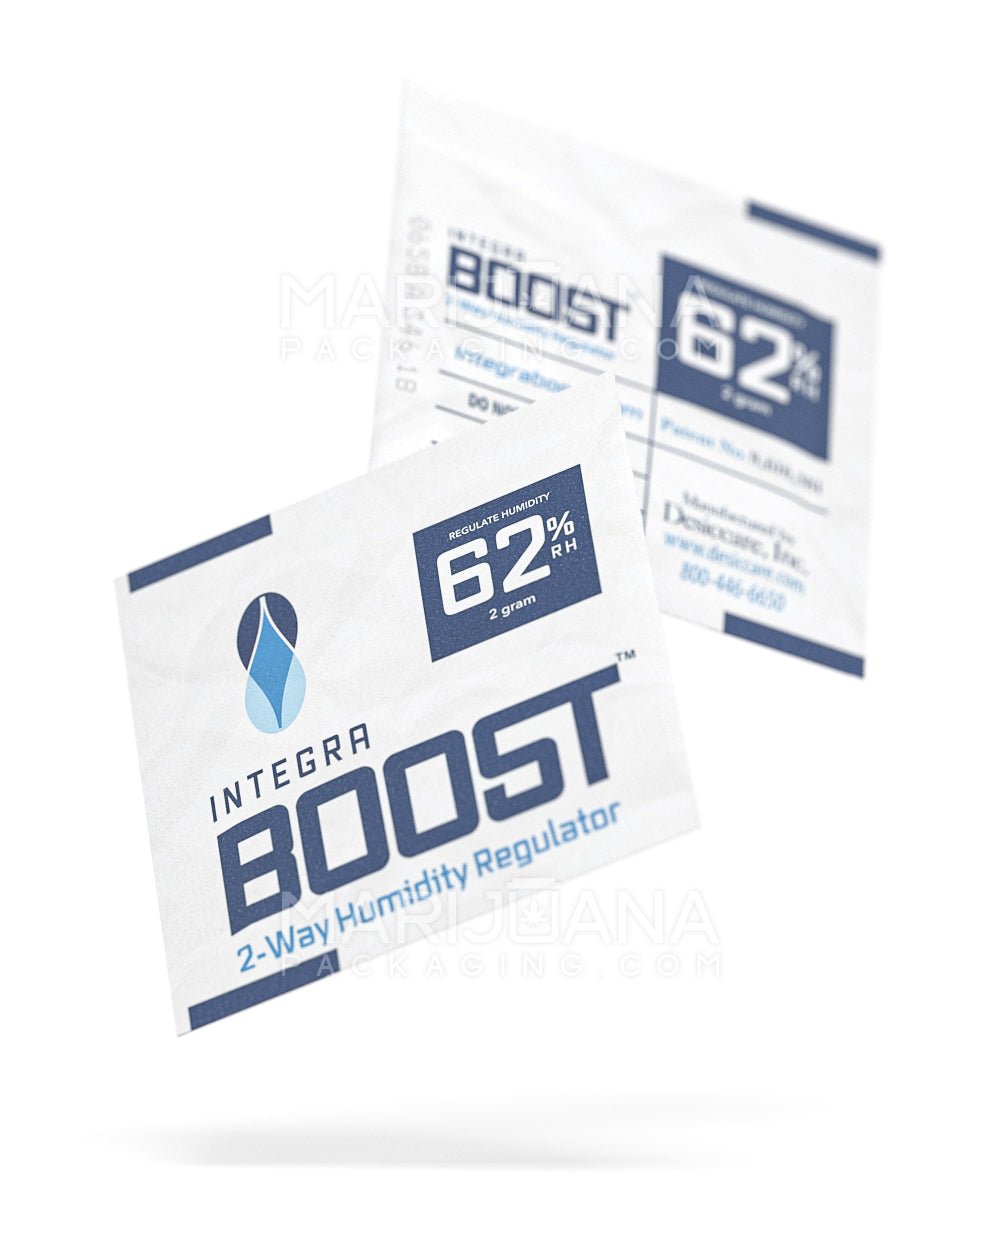 INTEGRA | Boost Humidity Control Packs | 2 Grams - 62% - 2000 Count - 6